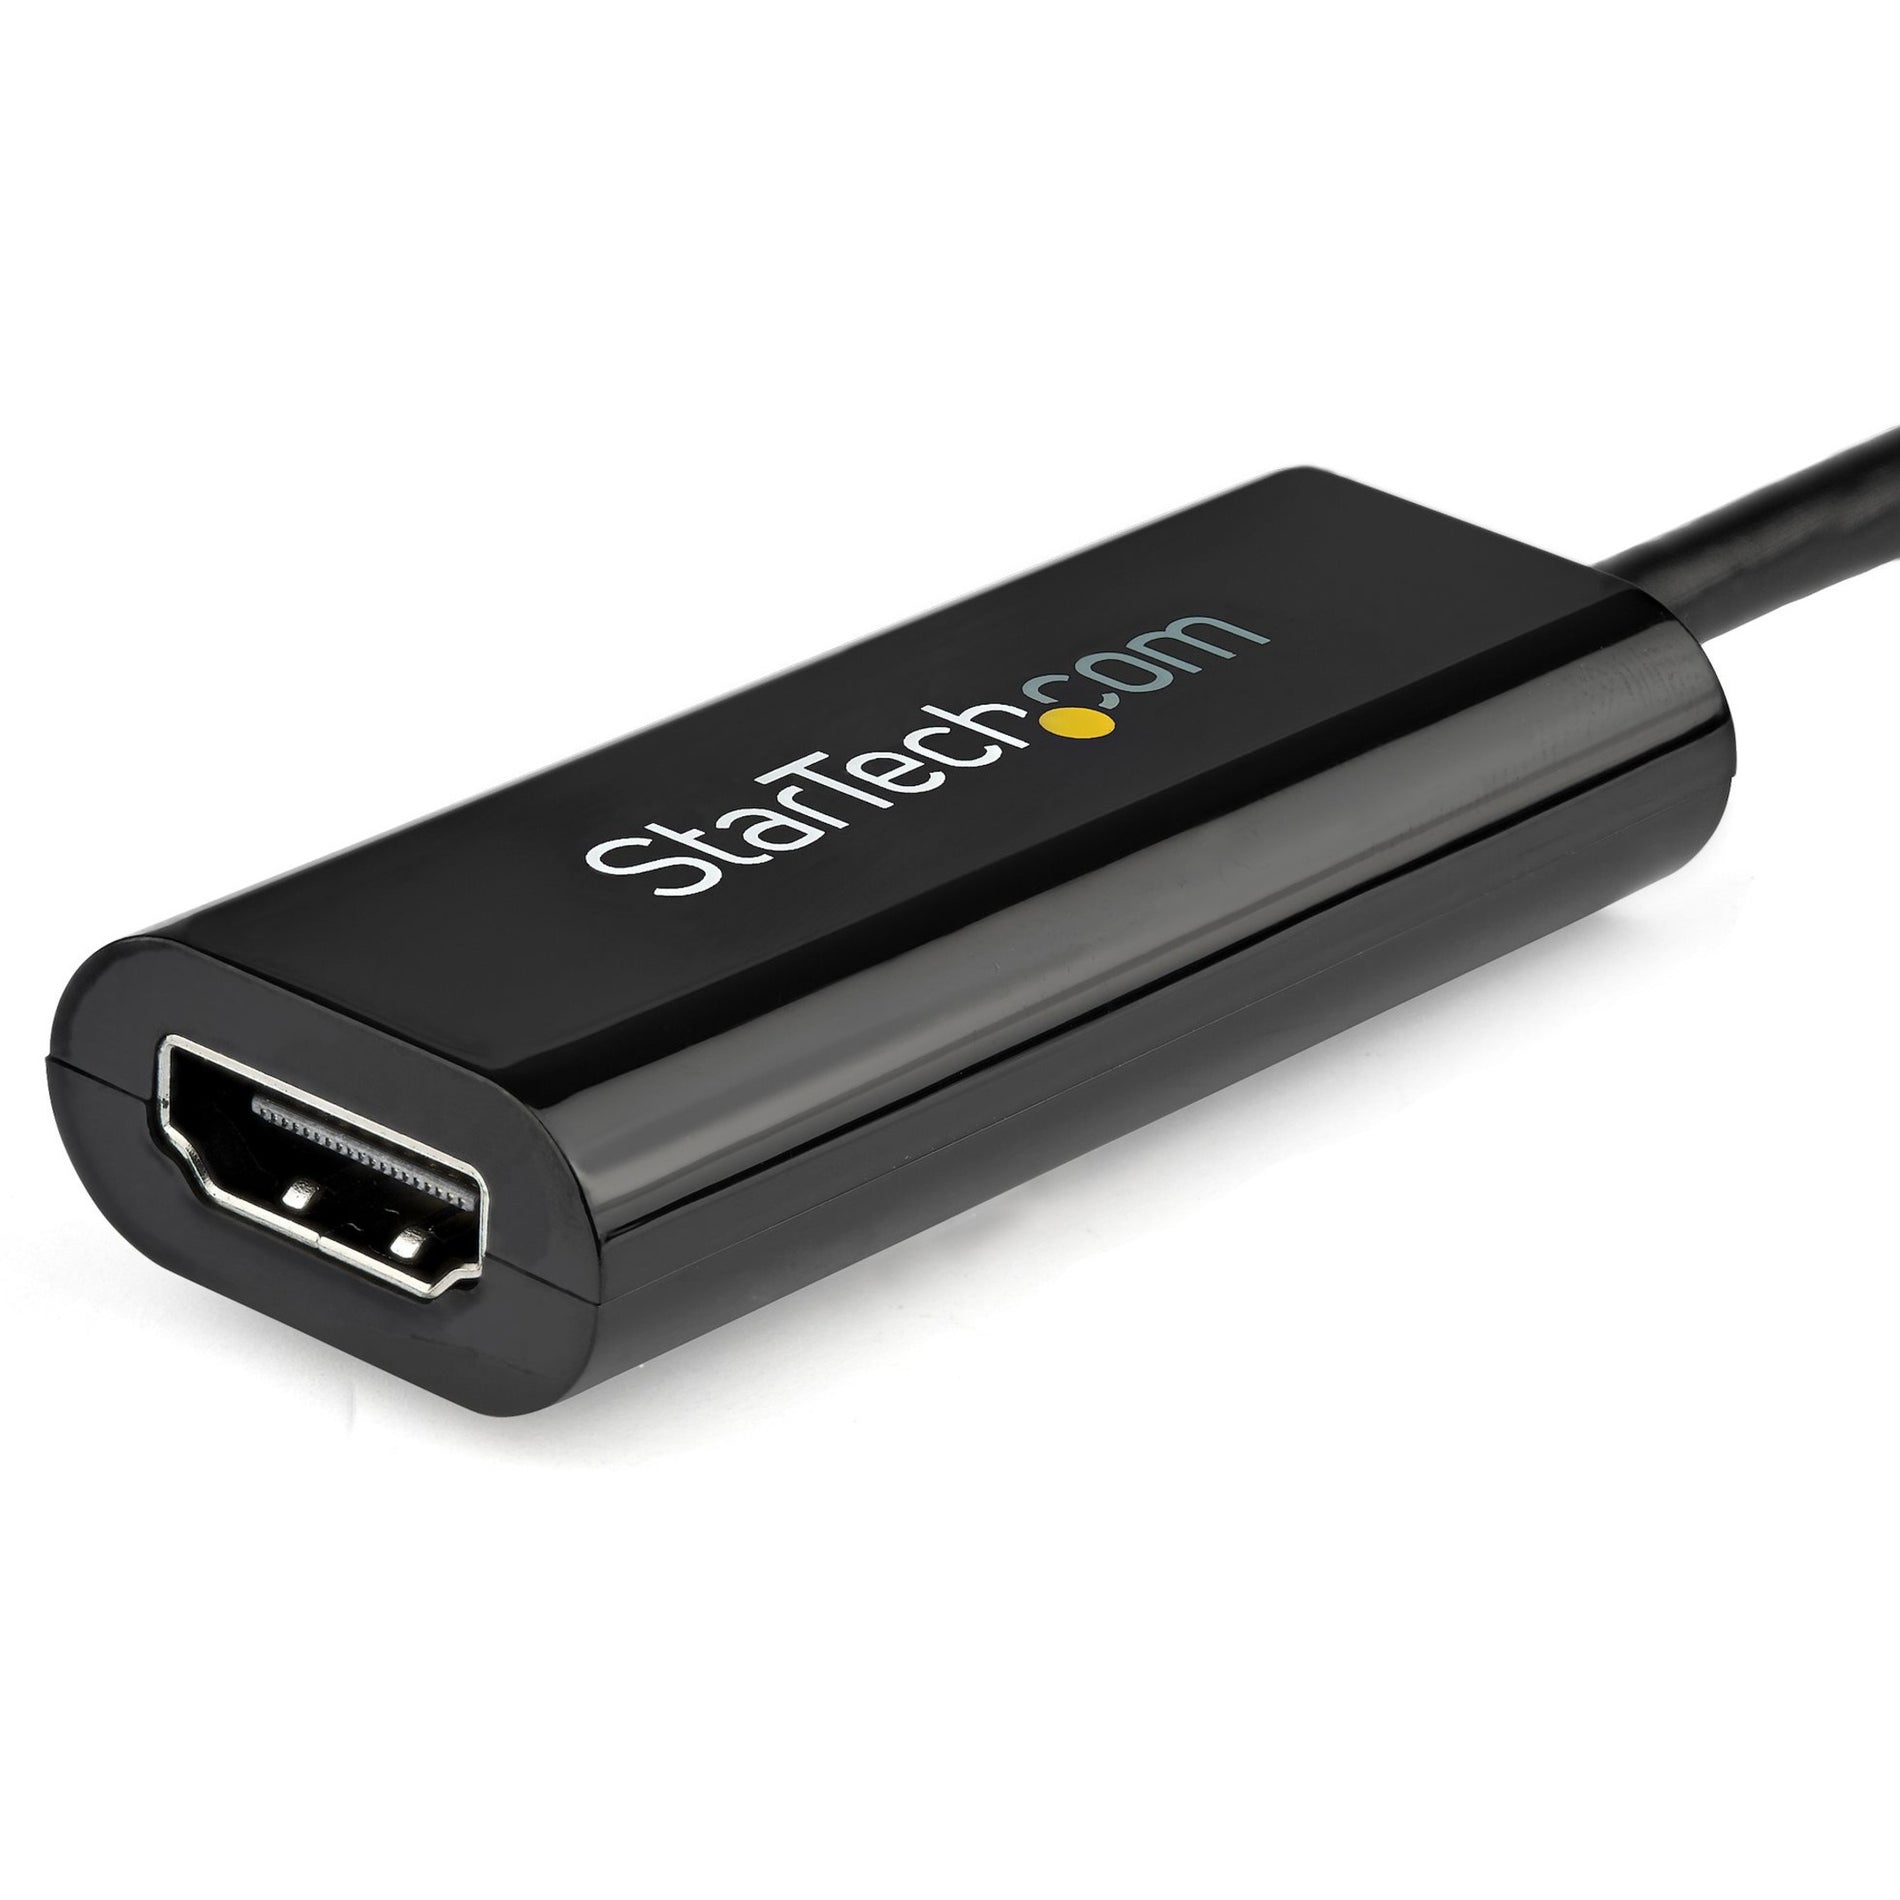 StarTech.com USB32HDES Slim USB 3.0 to HDMI External Video Card Multi Monitor Adapter, Full HD 1080p Support